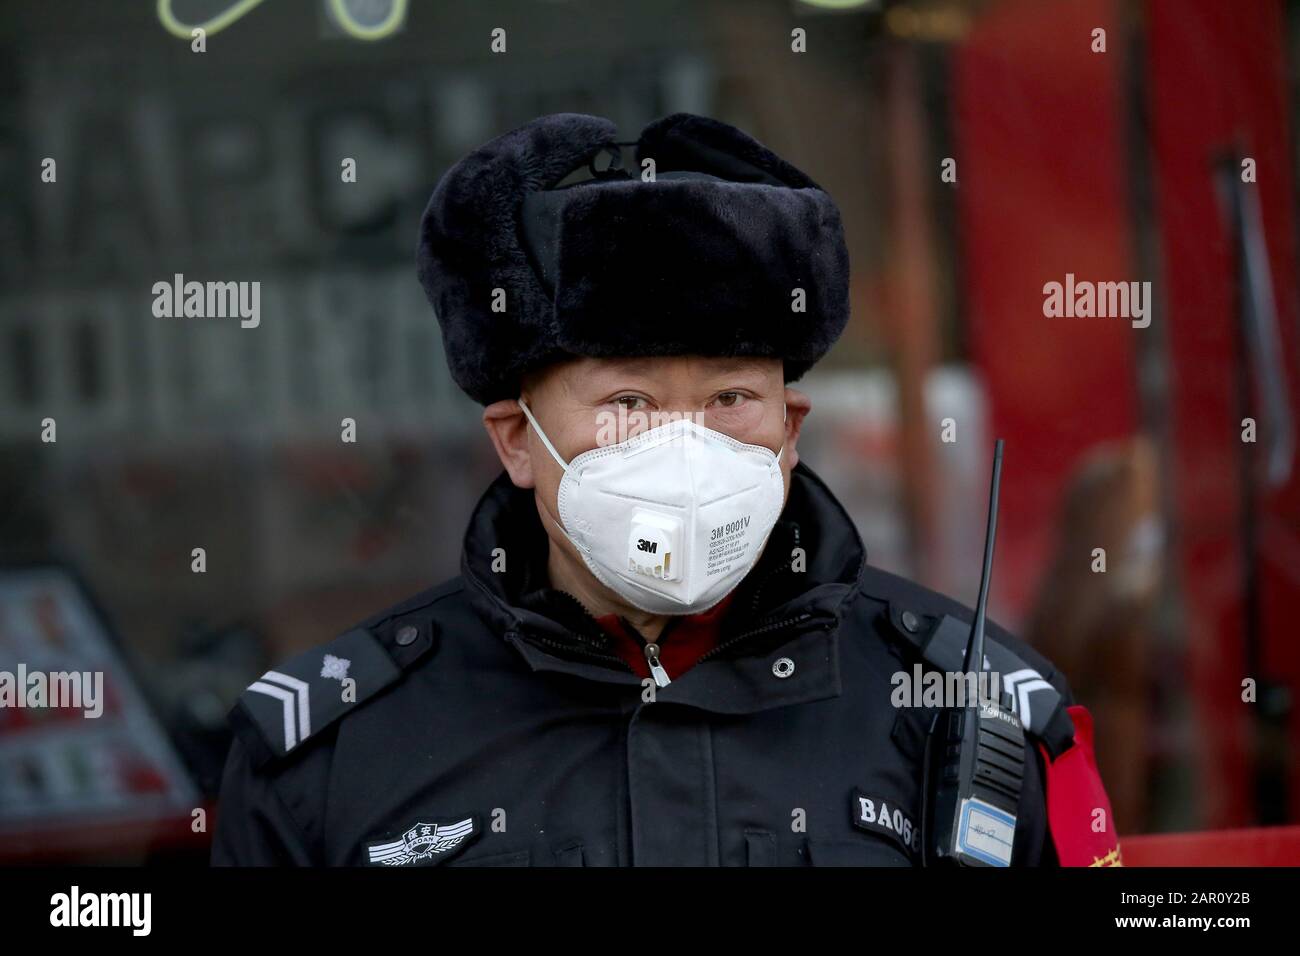 Beijing, China. 25th Jan, 2020. Chinese wear protective respiratory masks in Beijing on Saturday, January 25, 2020. All major Chinese New Year events have been cancelled in China's capital, along with all other large-scale activities in a bid to prevent the spread of the coronavirus. China virus death toll has hit 41. Photo by Stephen Shaver/UPI Credit: UPI/Alamy Live News Stock Photo